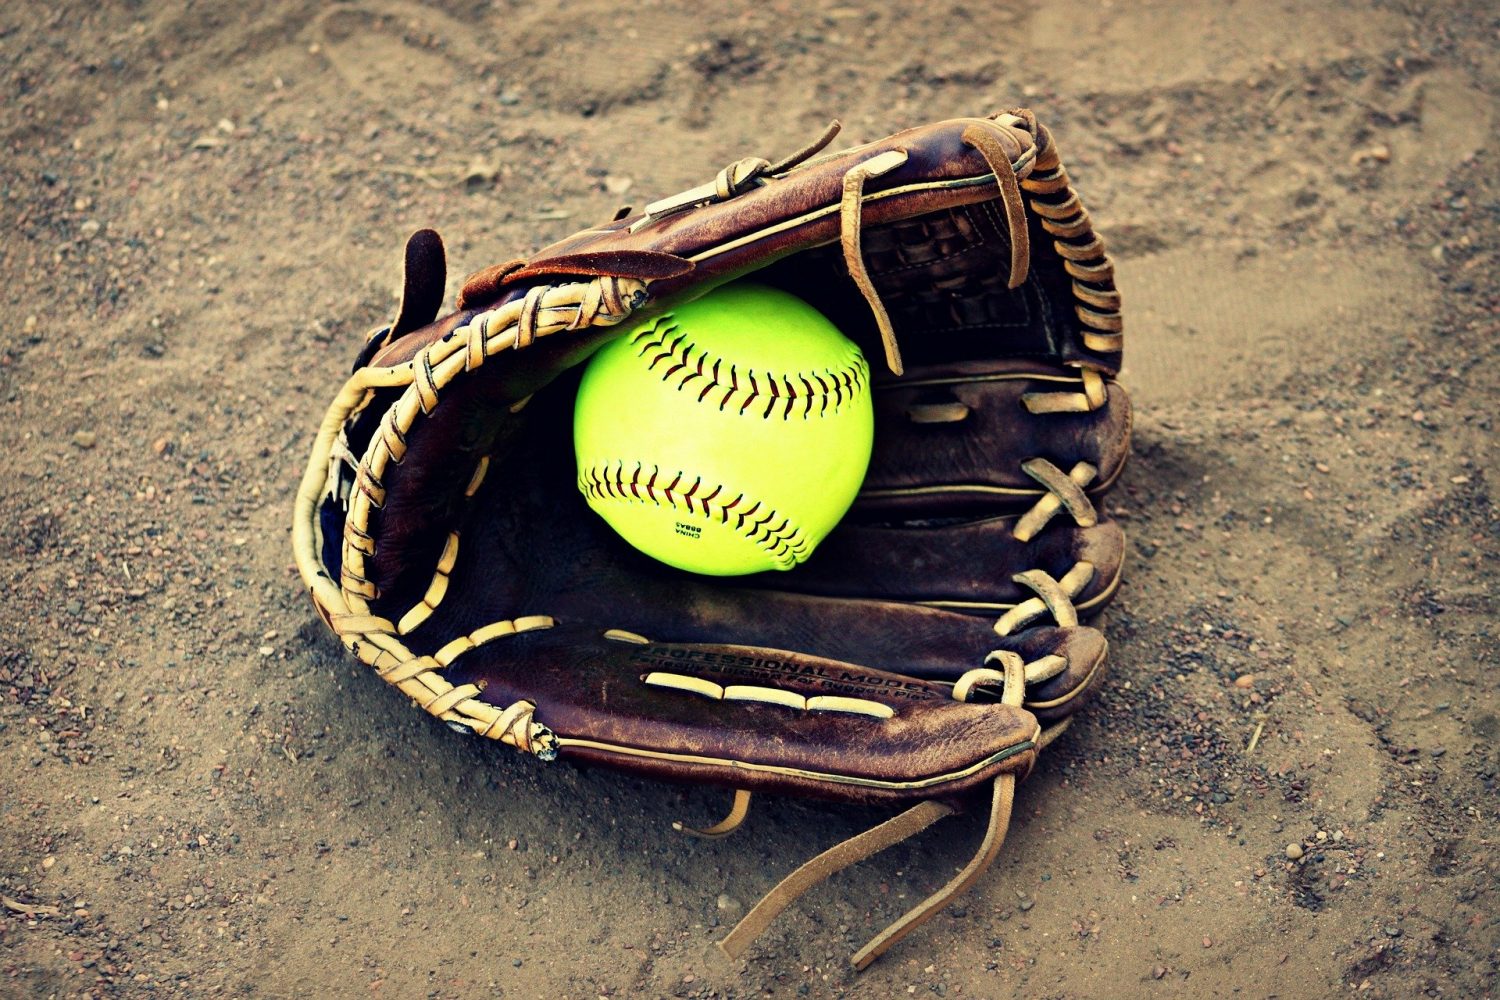 Bluejay Girls Softball – playing hard but still looking for a big win